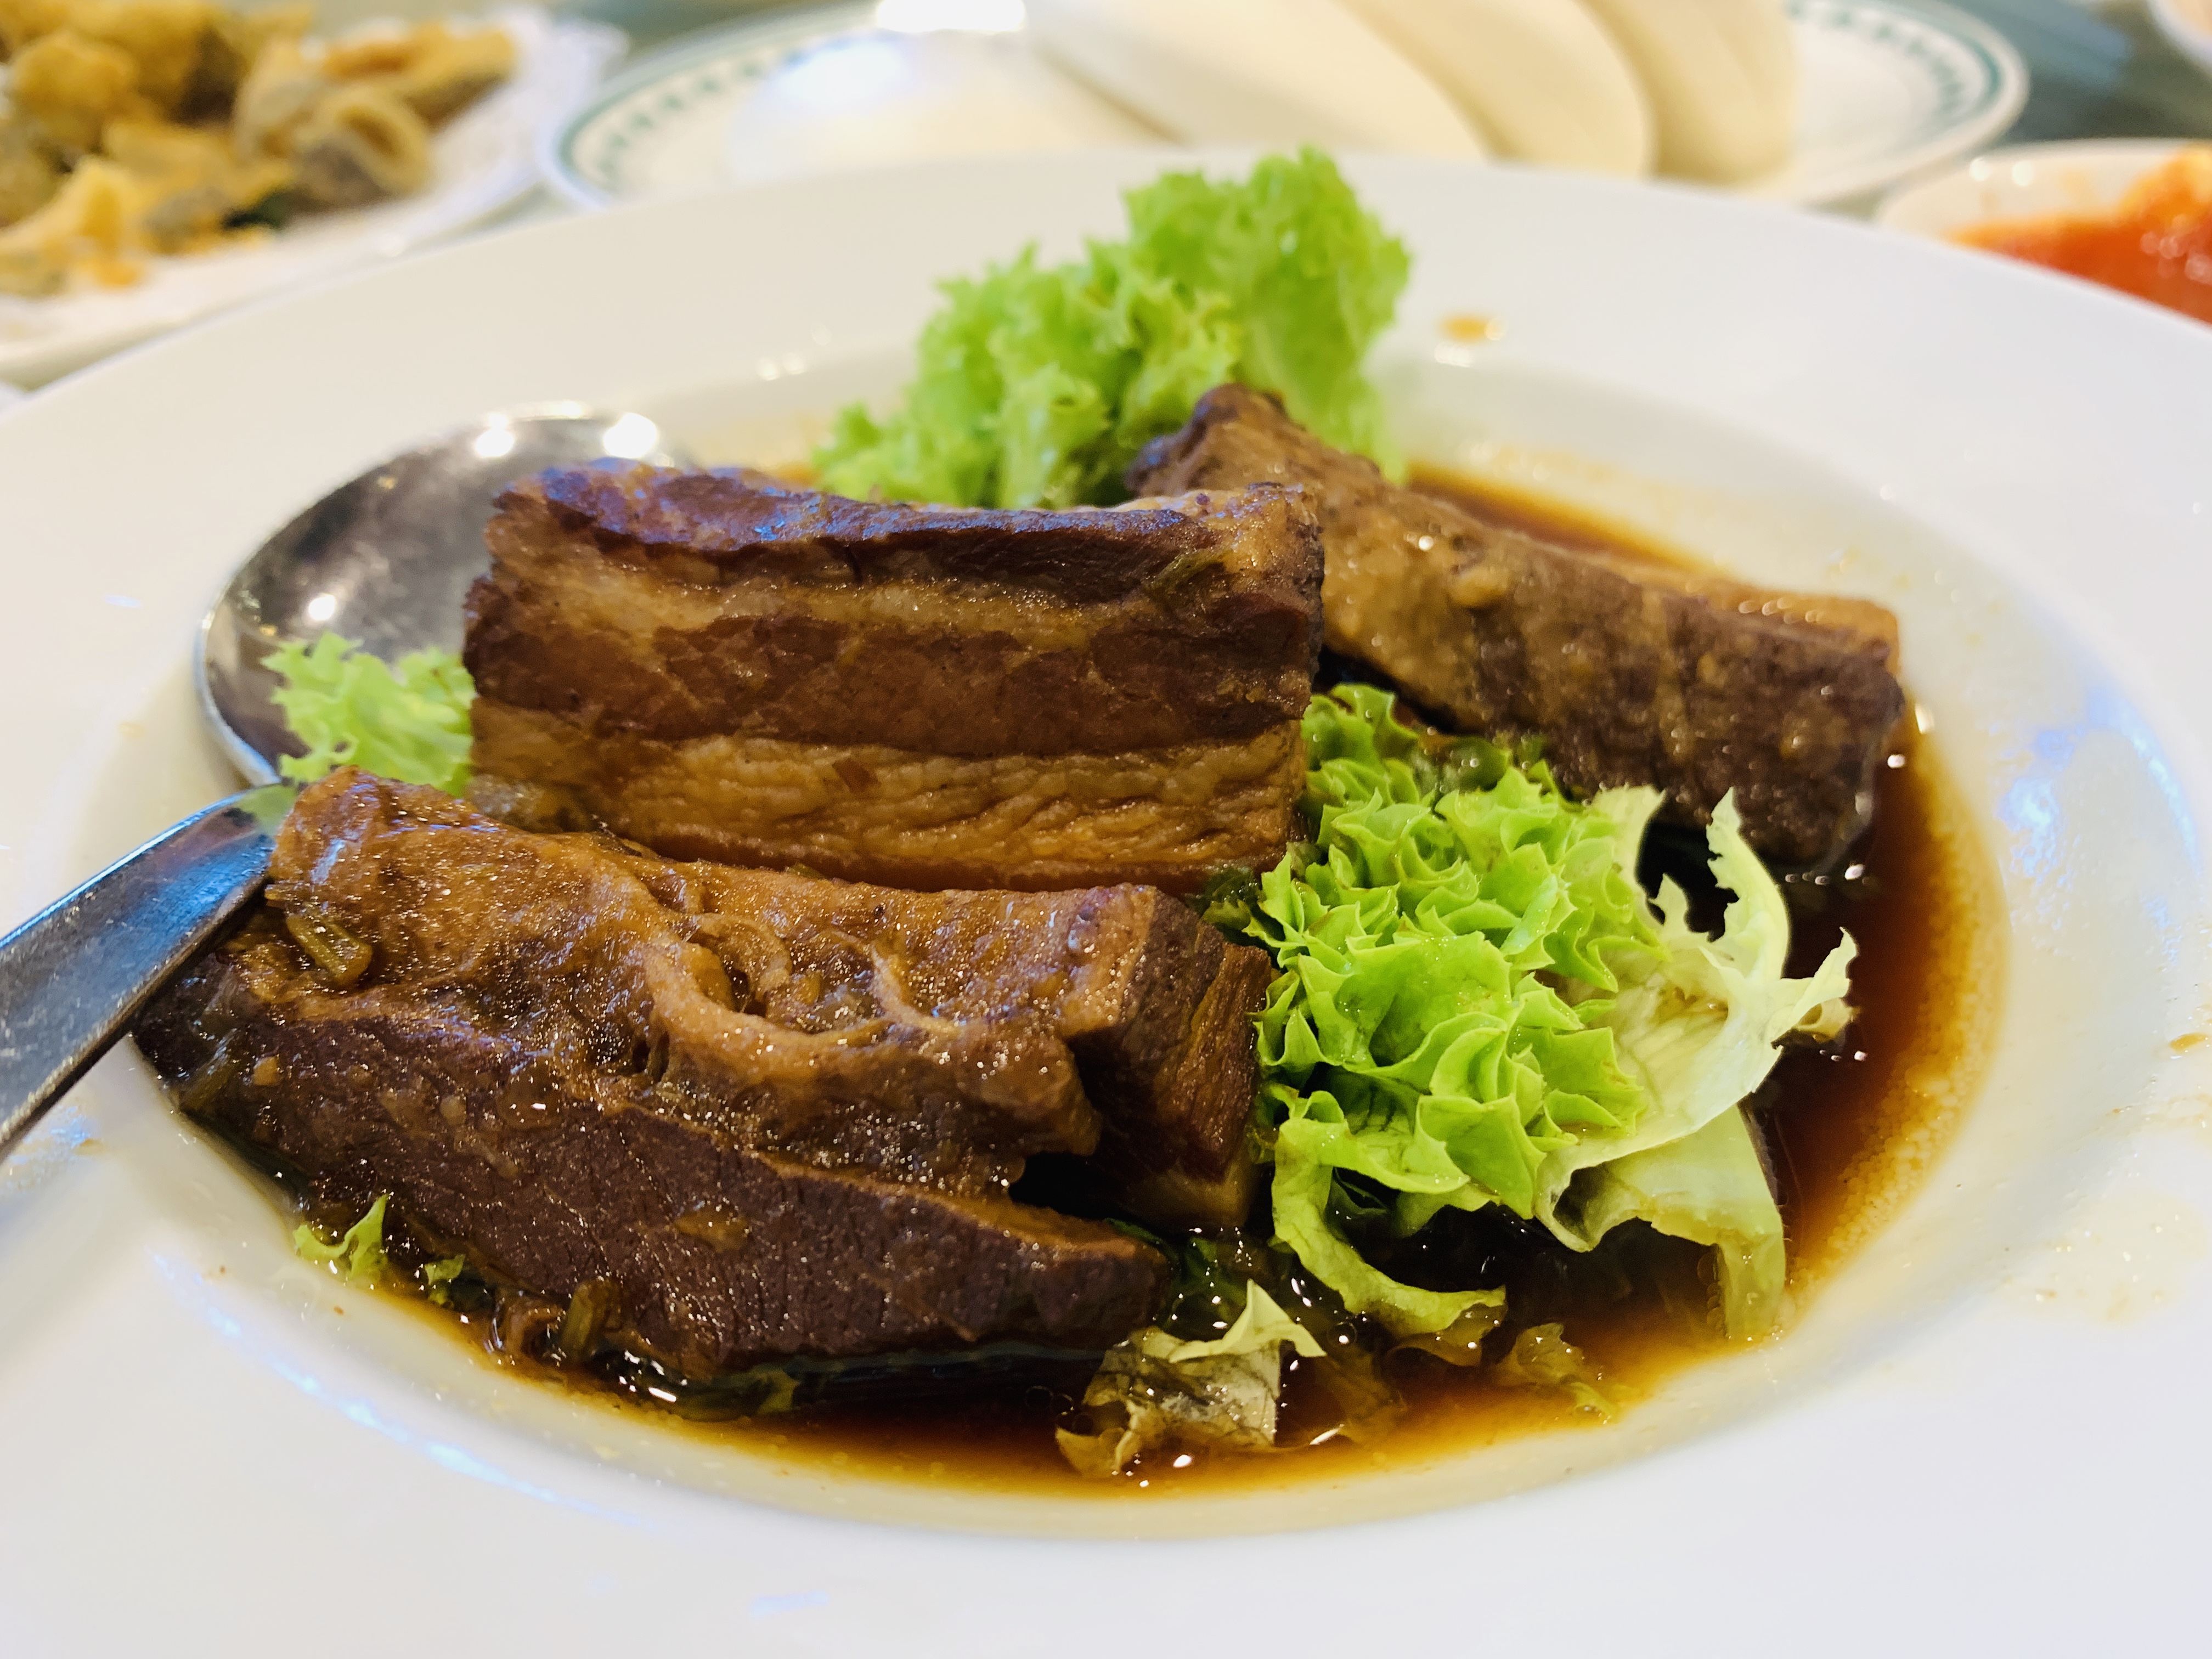 Ban Heng - Braised Dong Po Pork Belly served with Steamed Bun